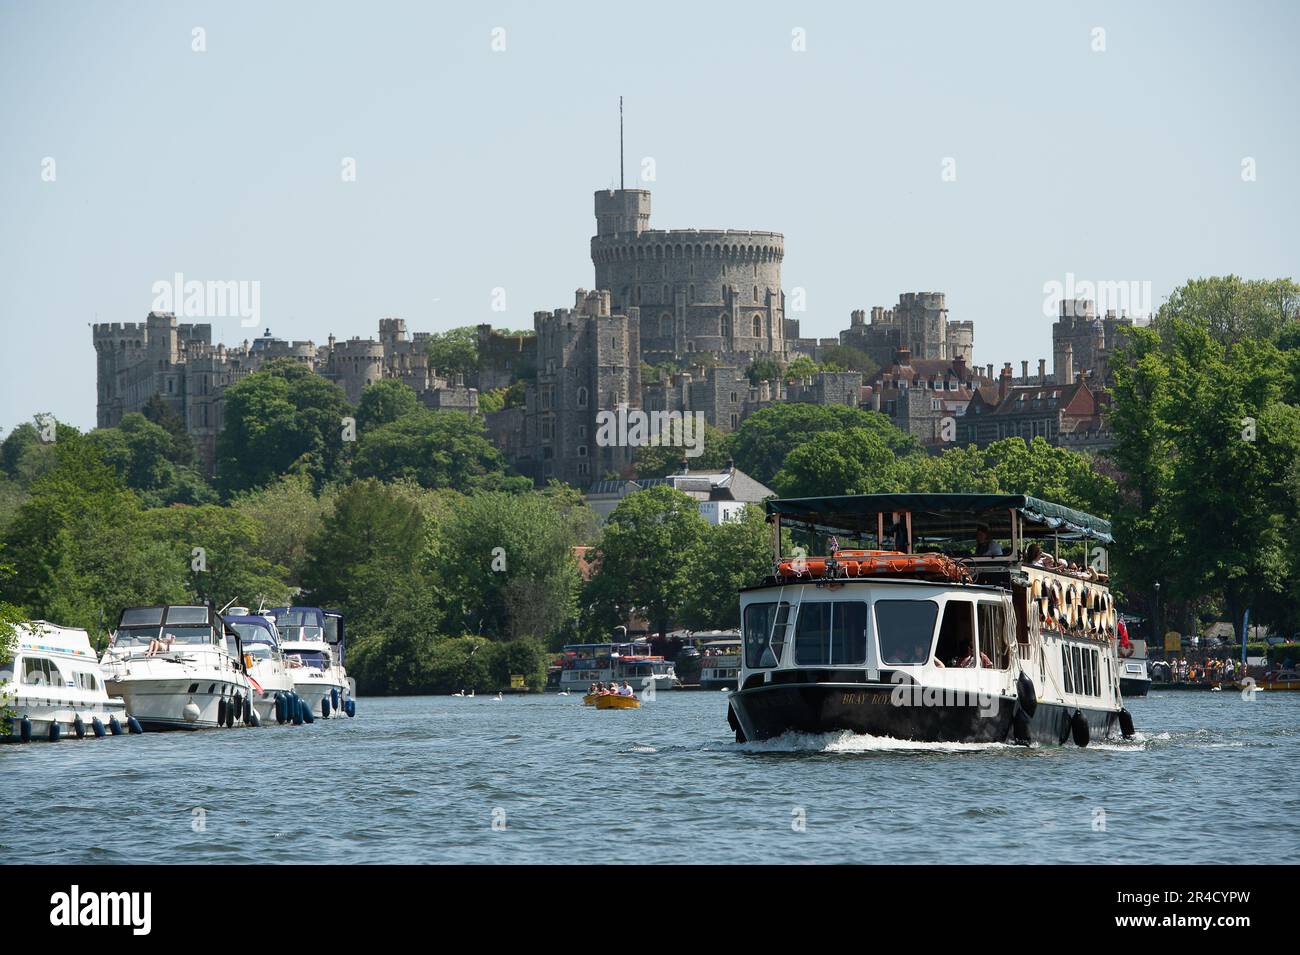 Windsor, Berkshire, UK. 27th May, 23. It was a beautiful warm and sunny day in Windsor Berkshire today as people flocked to the town for boat trips on the River Thames with the backdrop of the famous Windsor Castle. Credit: Maureen McLean/Alamy Live News Stock Photo